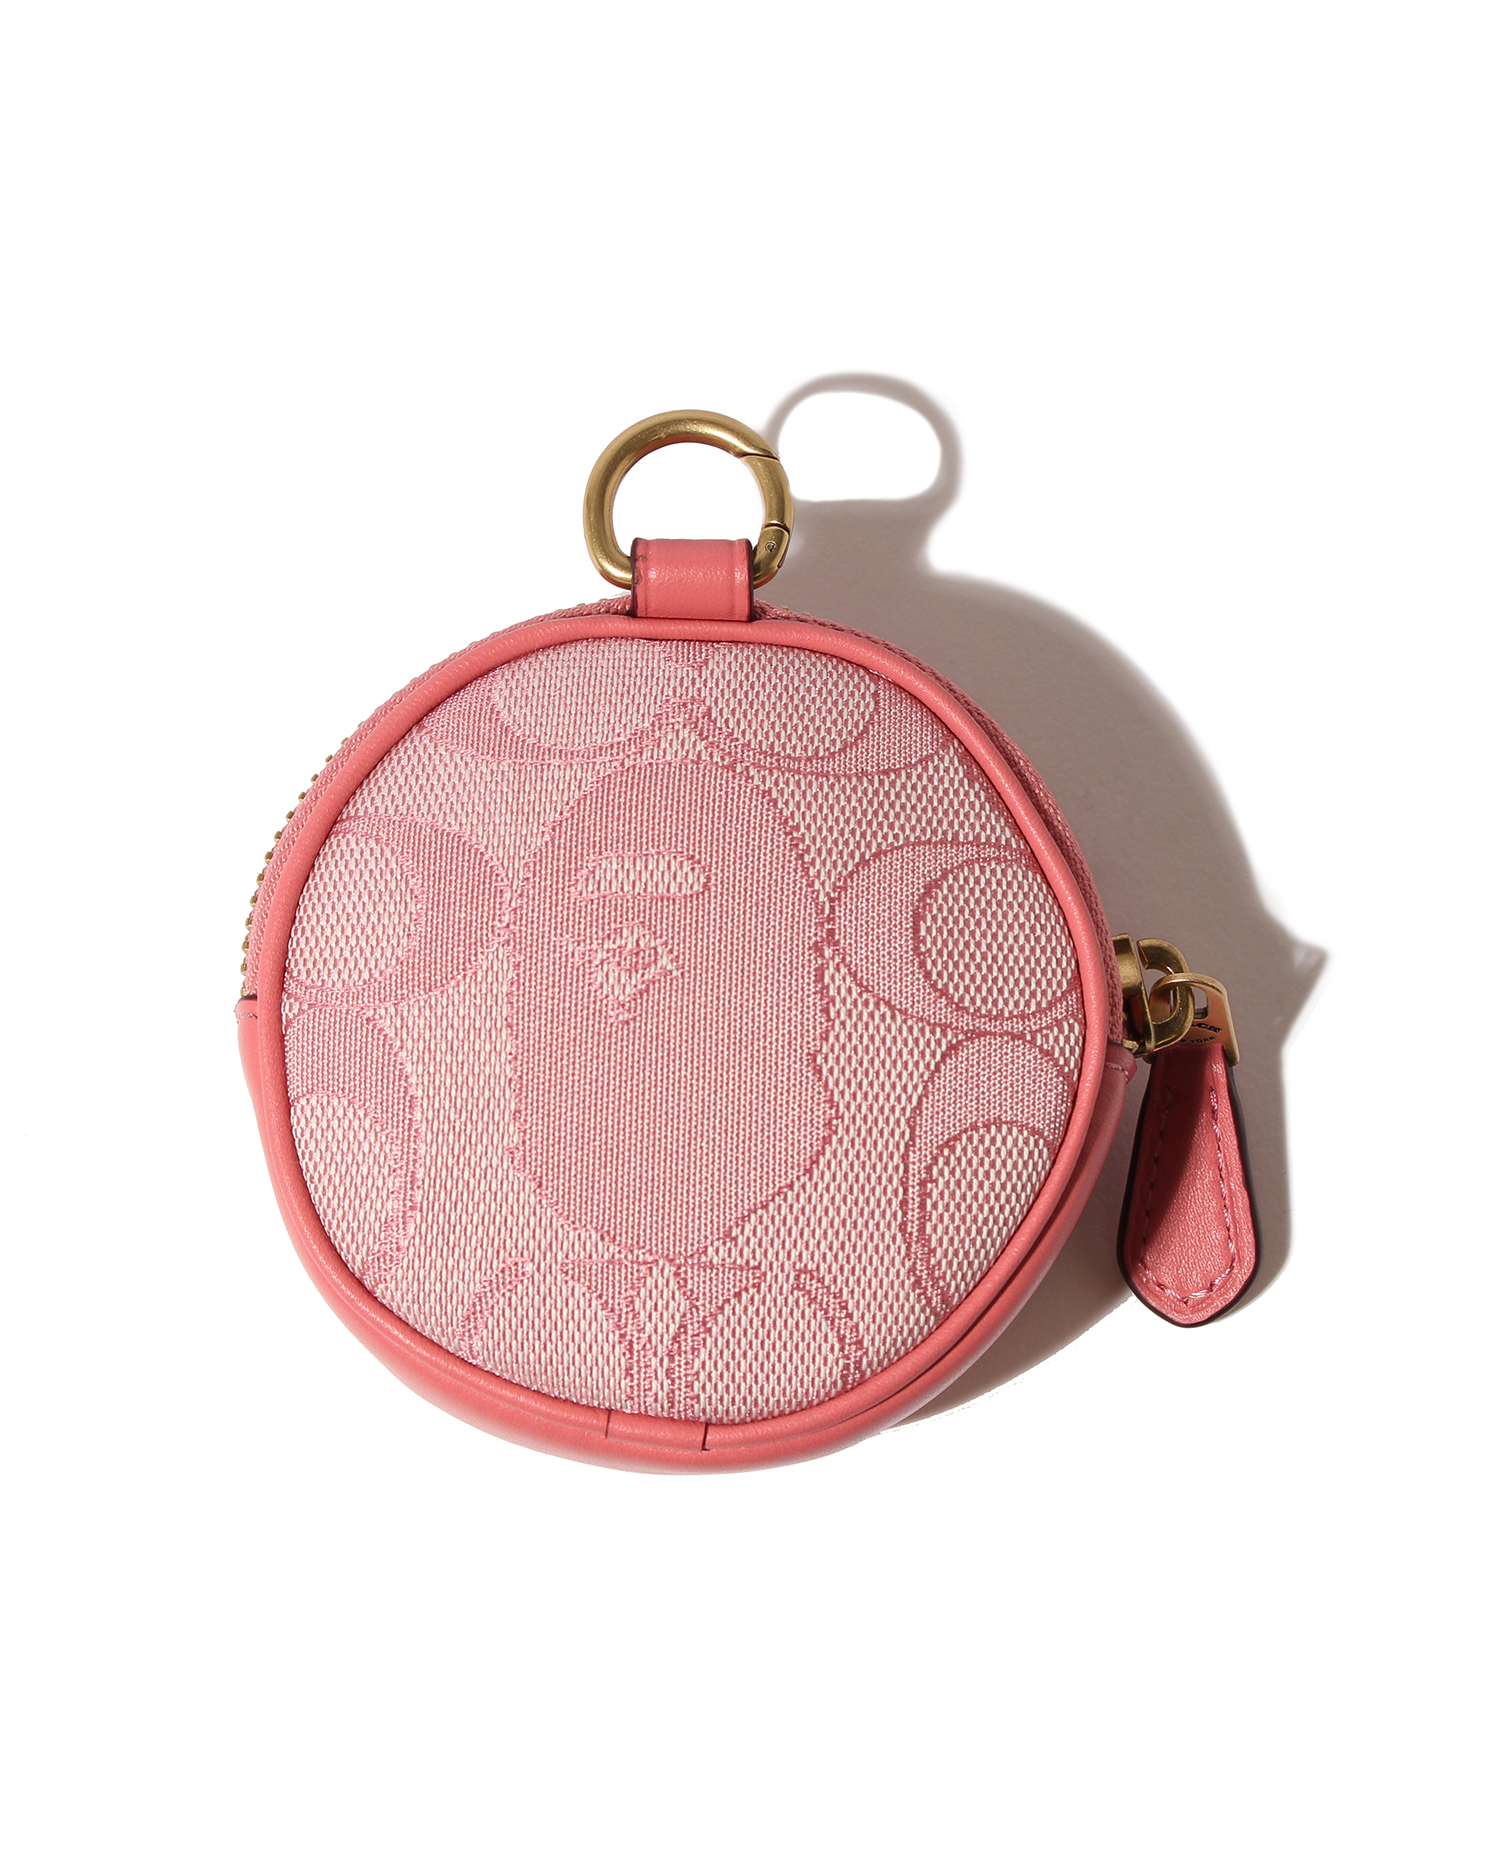 Coach x BAPE Coin Case Pink in Canvas/Leather - US